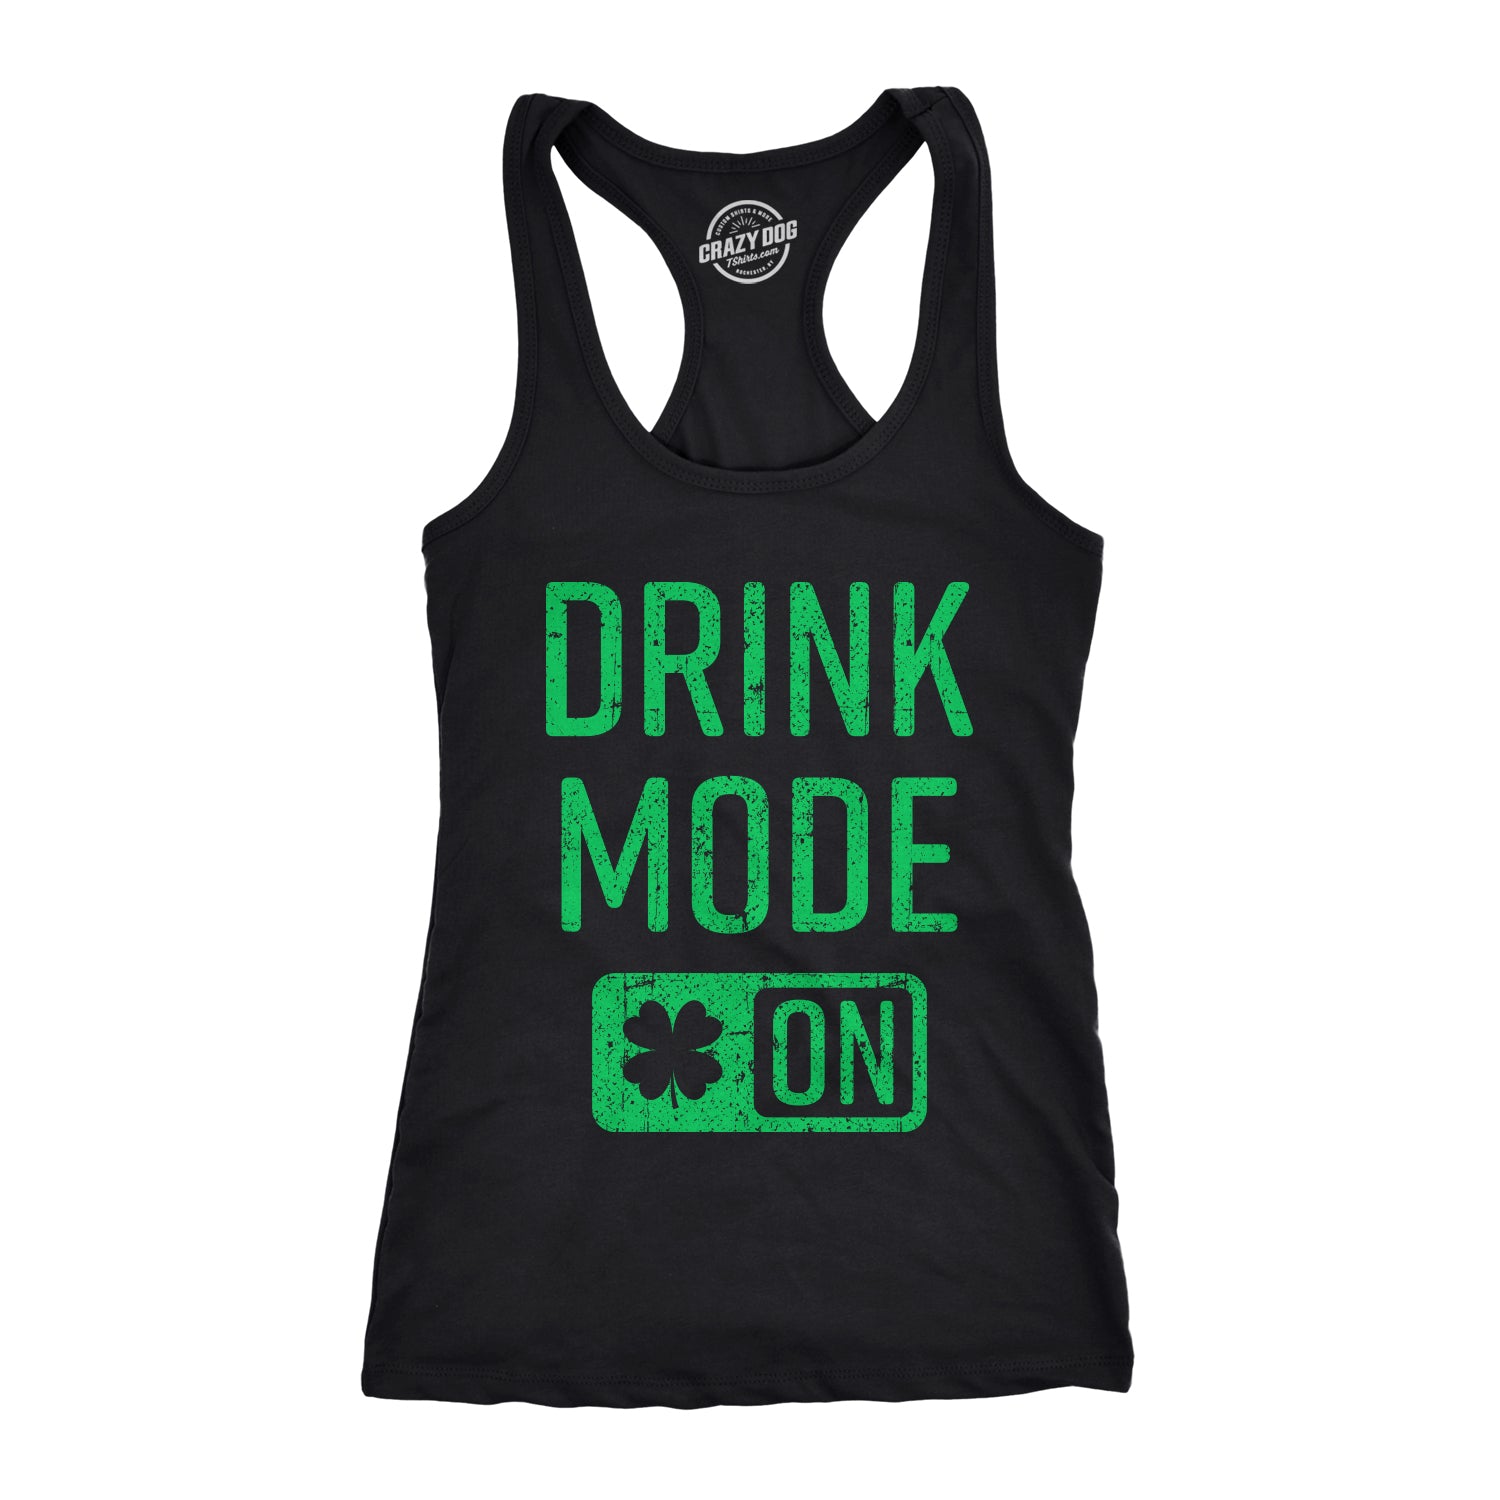  Gym Running Workout Tank Tops St-Patrick-Day-Green-Clover Women  Sleeveless Sports Shirt Yoga Racerback Tank Tops : Clothing, Shoes & Jewelry